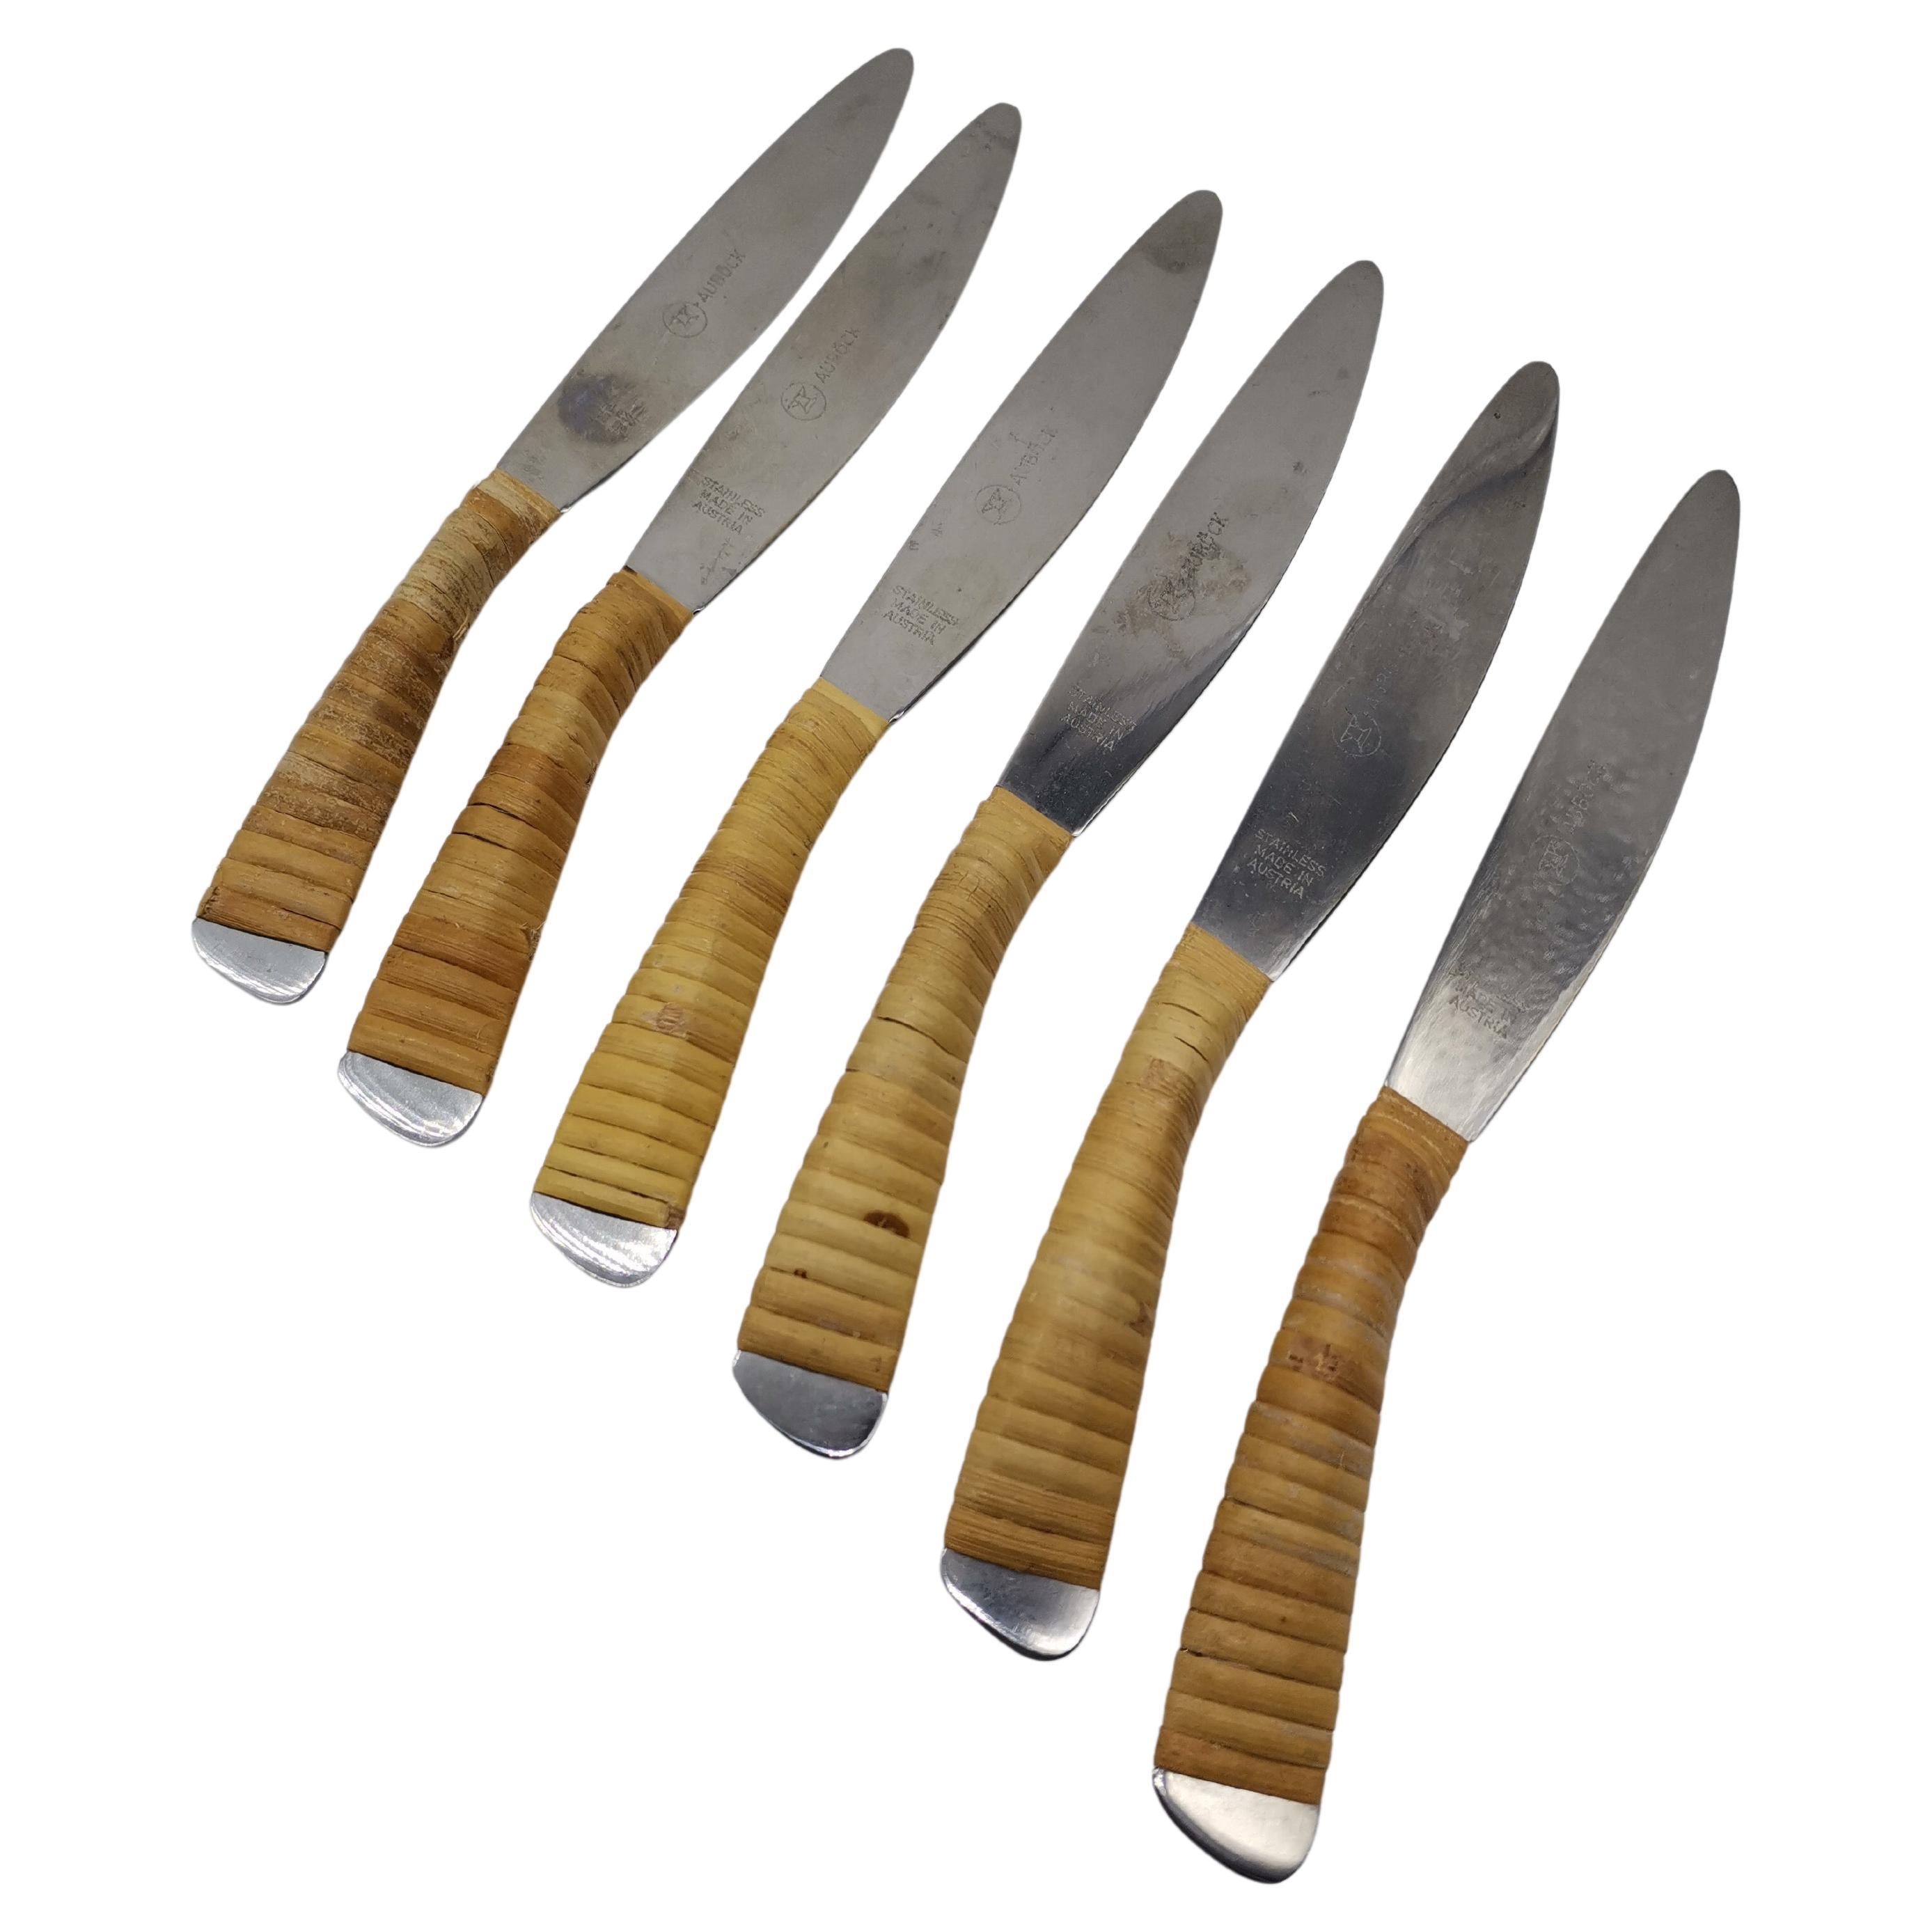 6 Pcs. Cutlery Knives, Stainless Steel and Wood, Carl Auböck Vienna, Austria